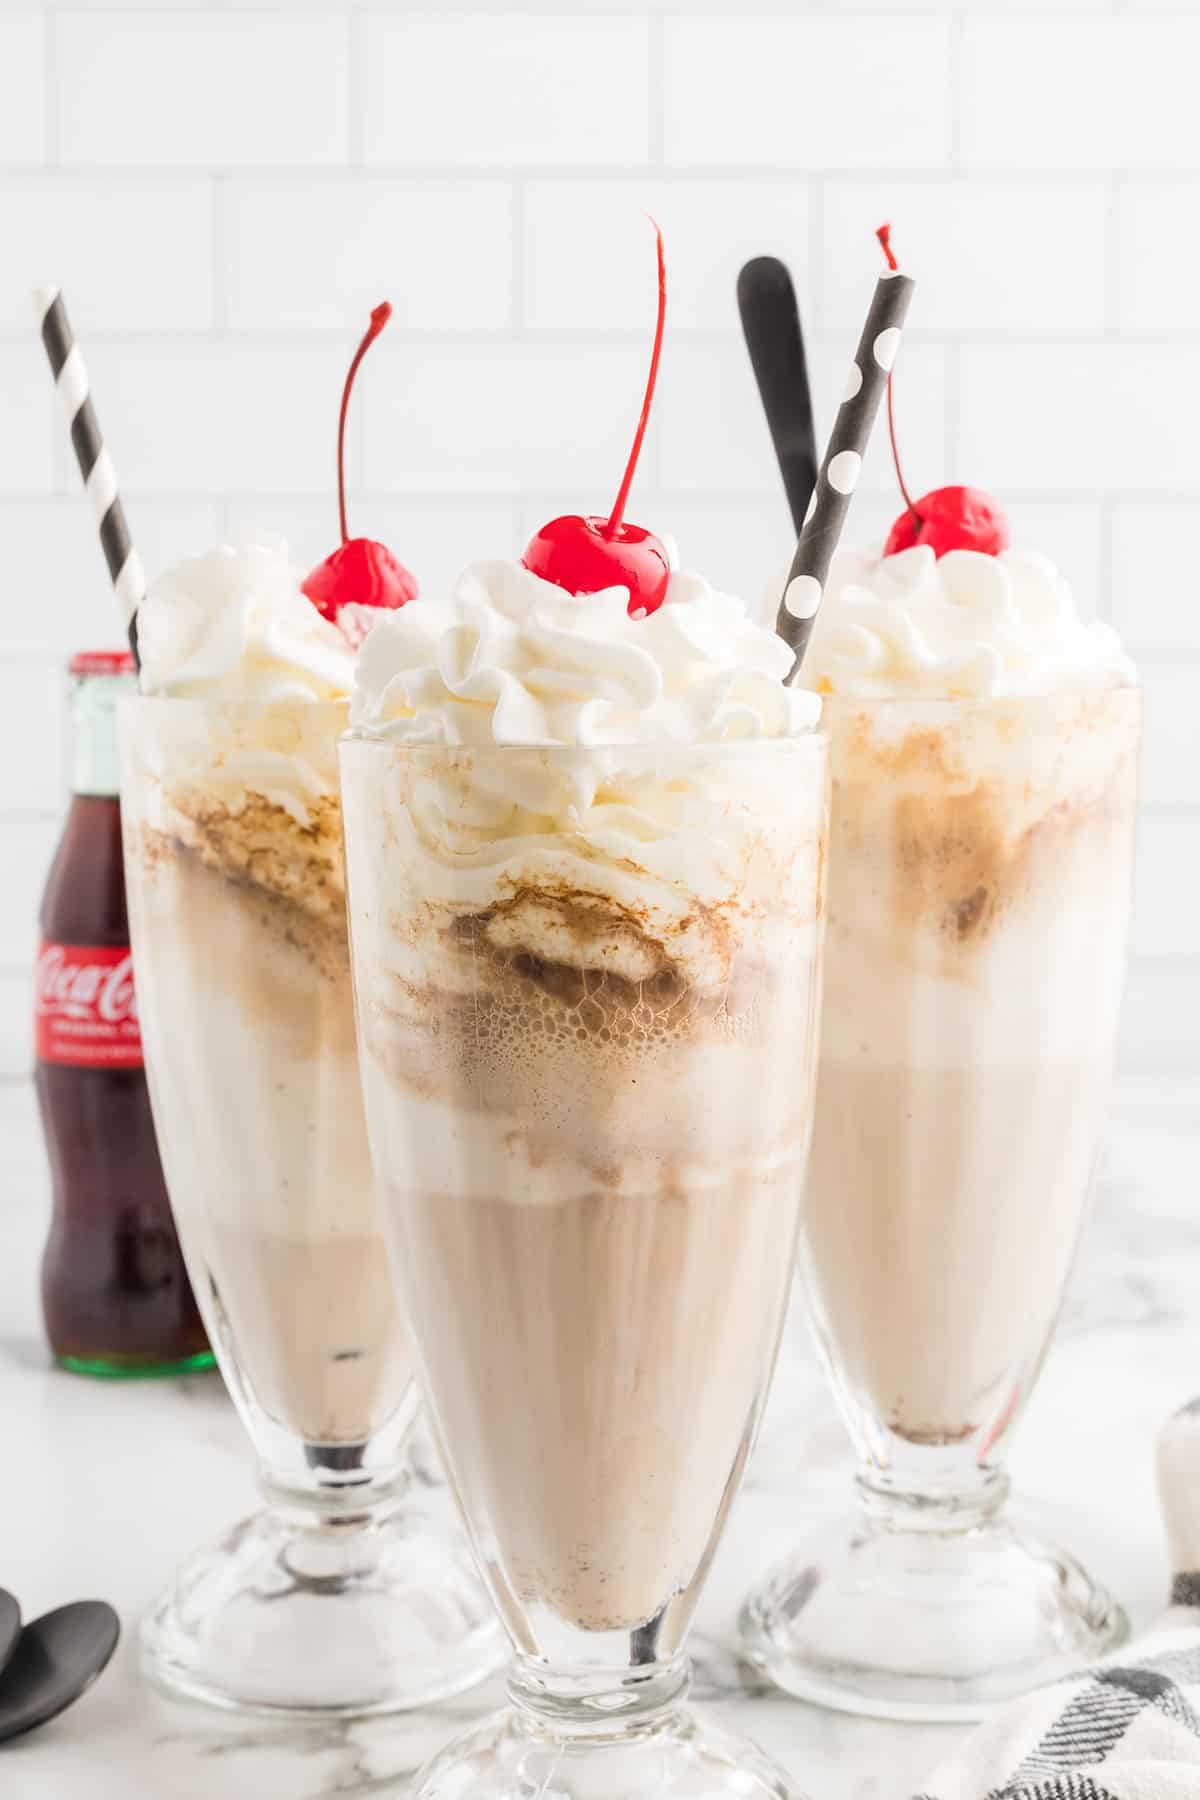 Coke floats in tall glasses with whipped cream and a cherry on top.